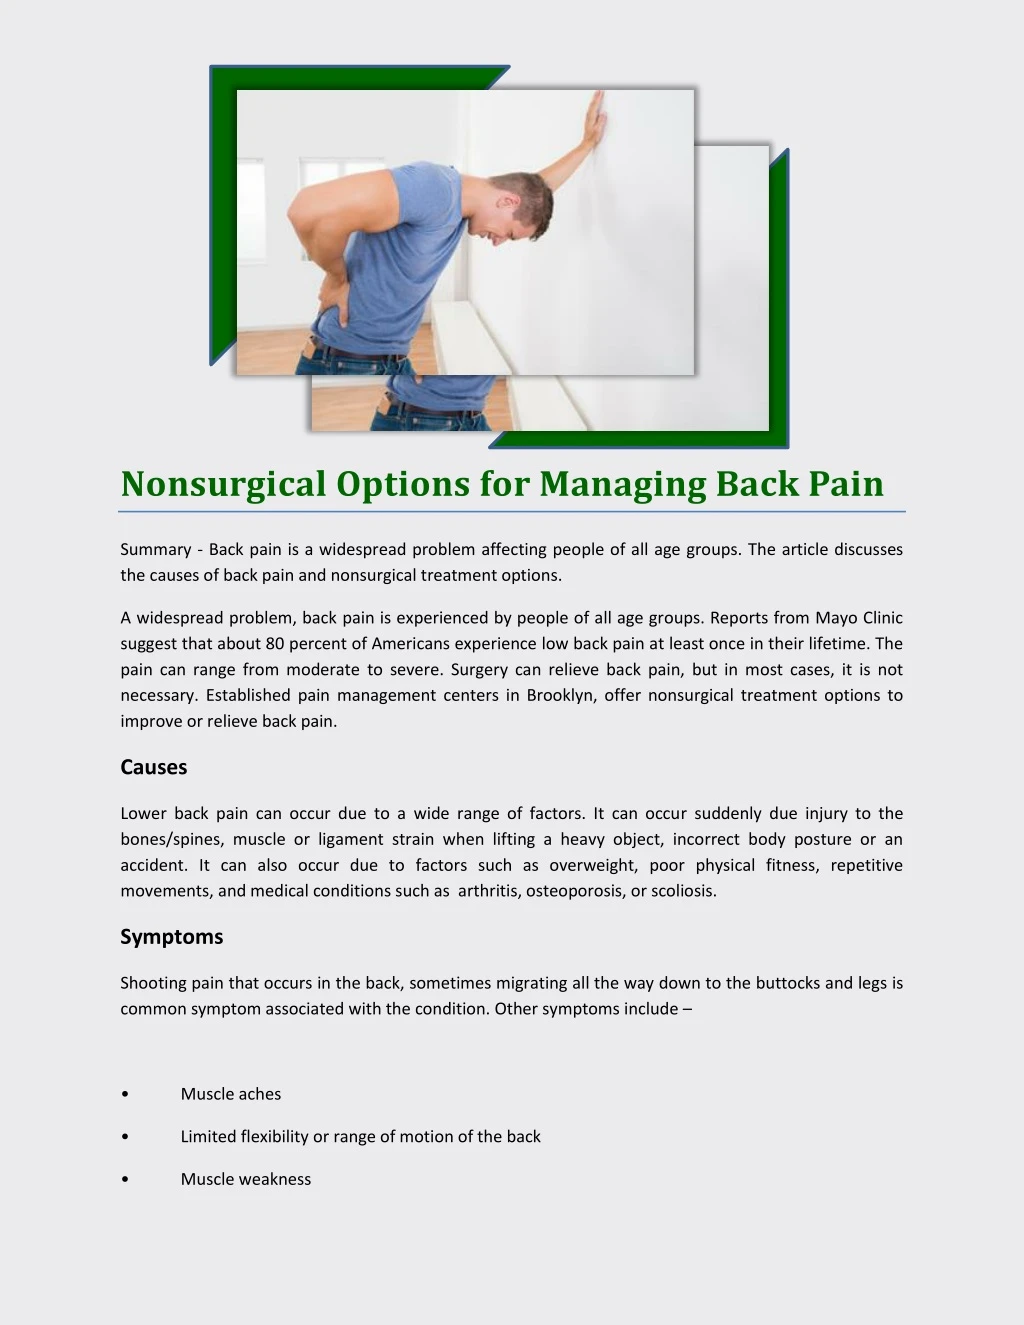 nonsurgical options for managing back pain